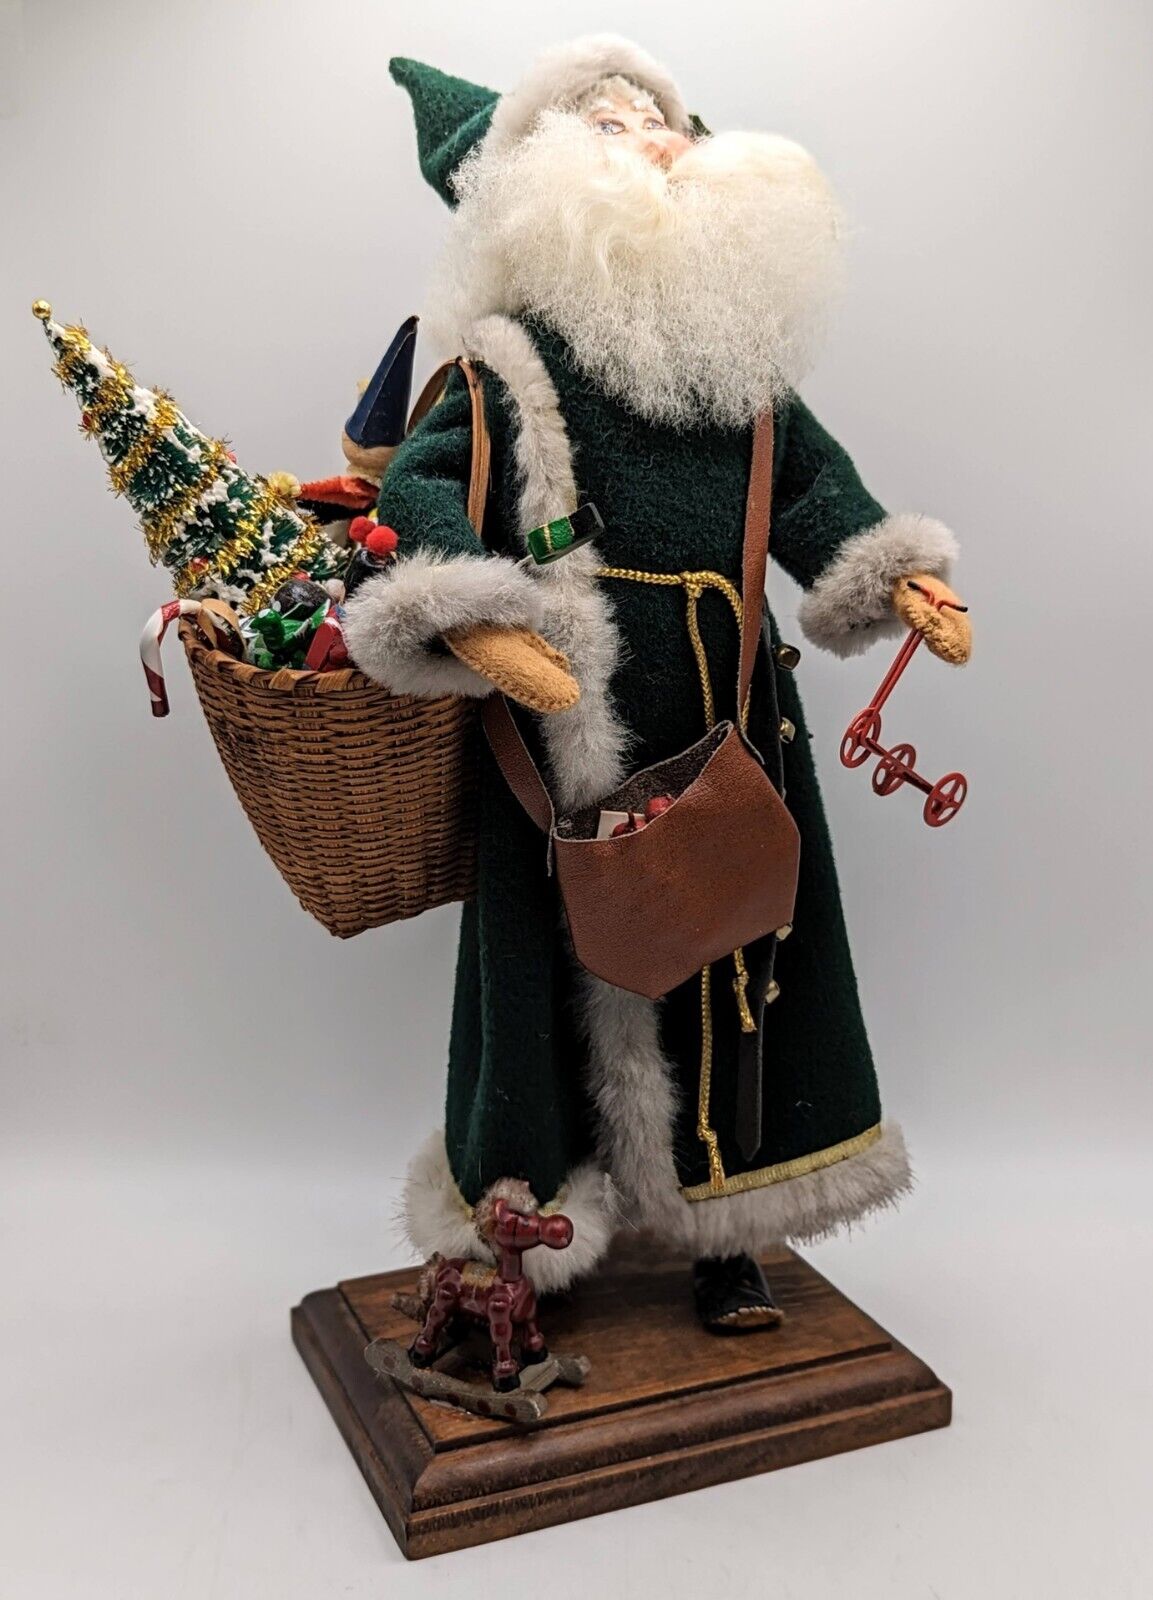 Handmade Green Santa With Toys Vintage Figurine Statue Crafted Luci Isaacs 1987